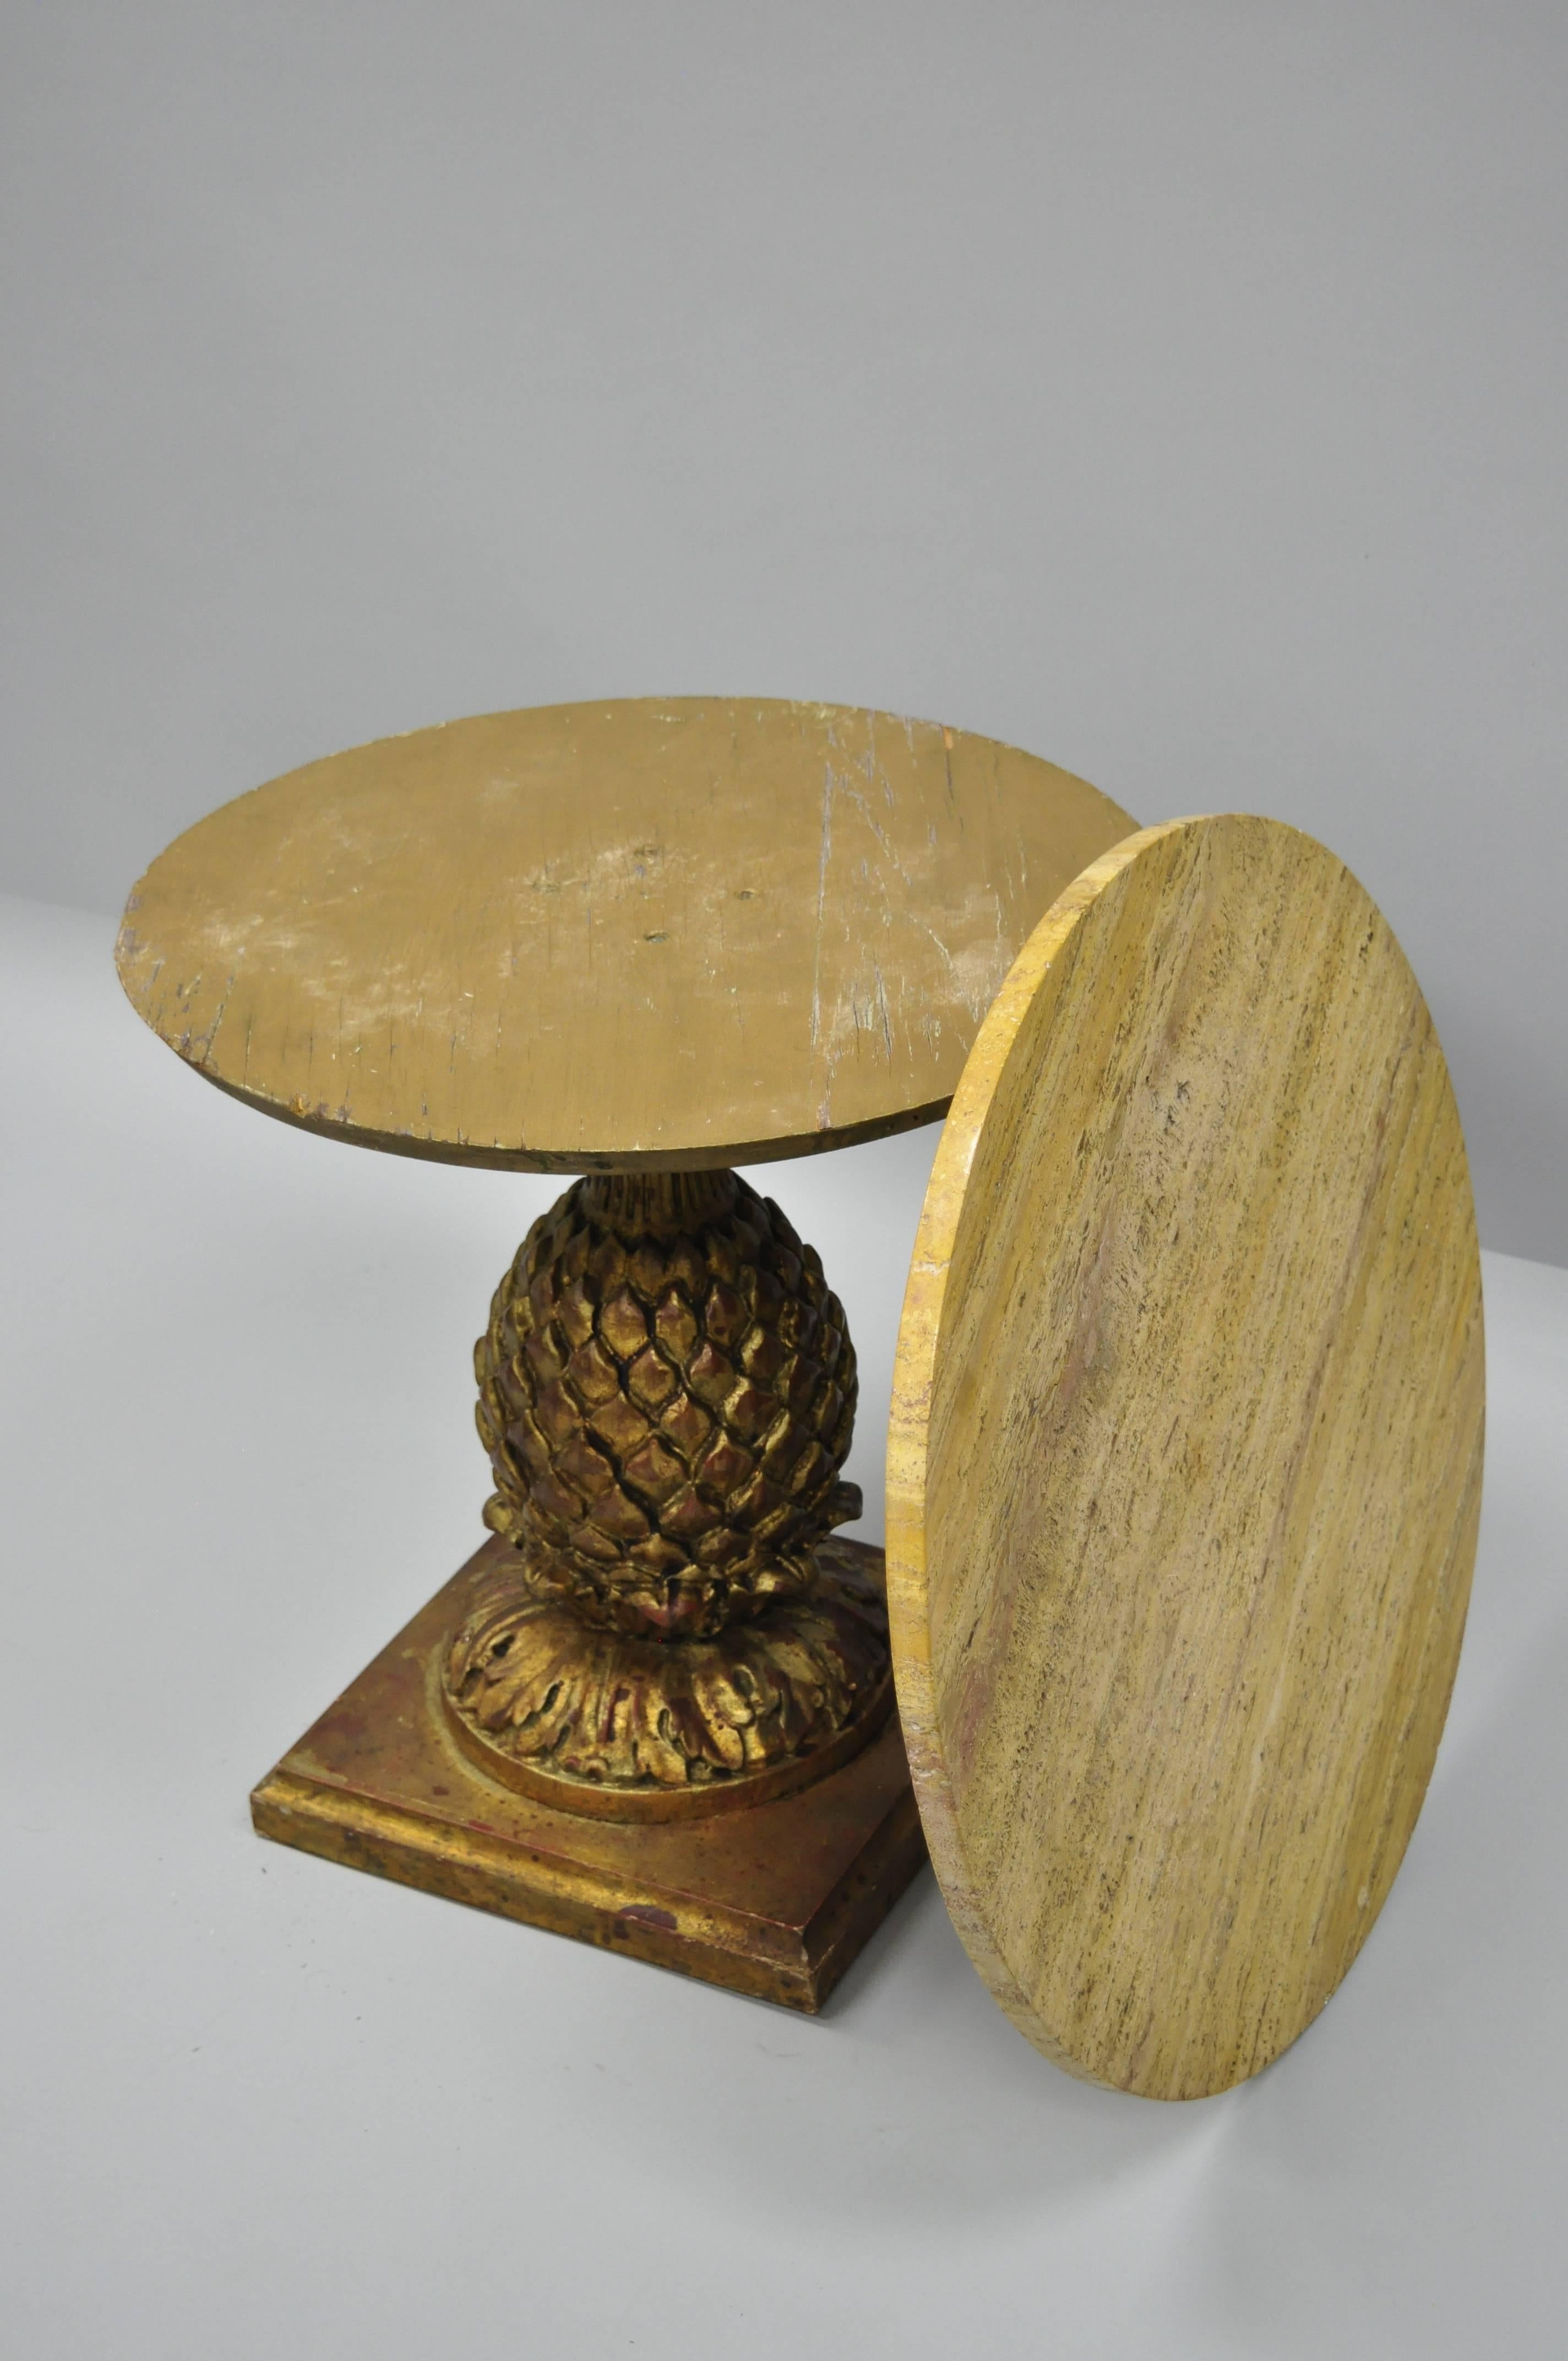 20th Century Italian Hollywood Regency Giltwood Carved Pineapple Travertine Top Side Table